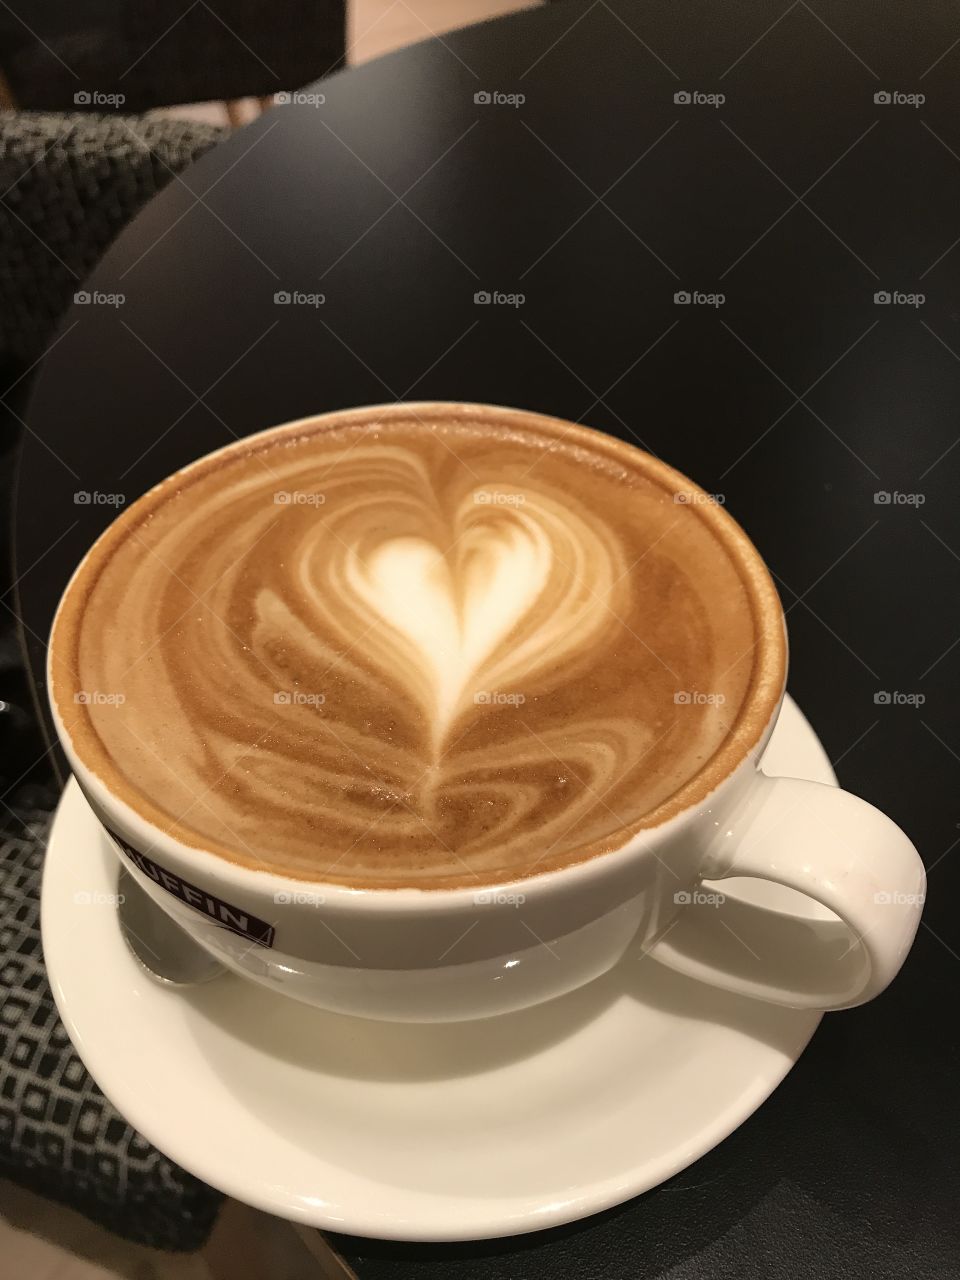 Coffee with a love heart created using the frothy milk